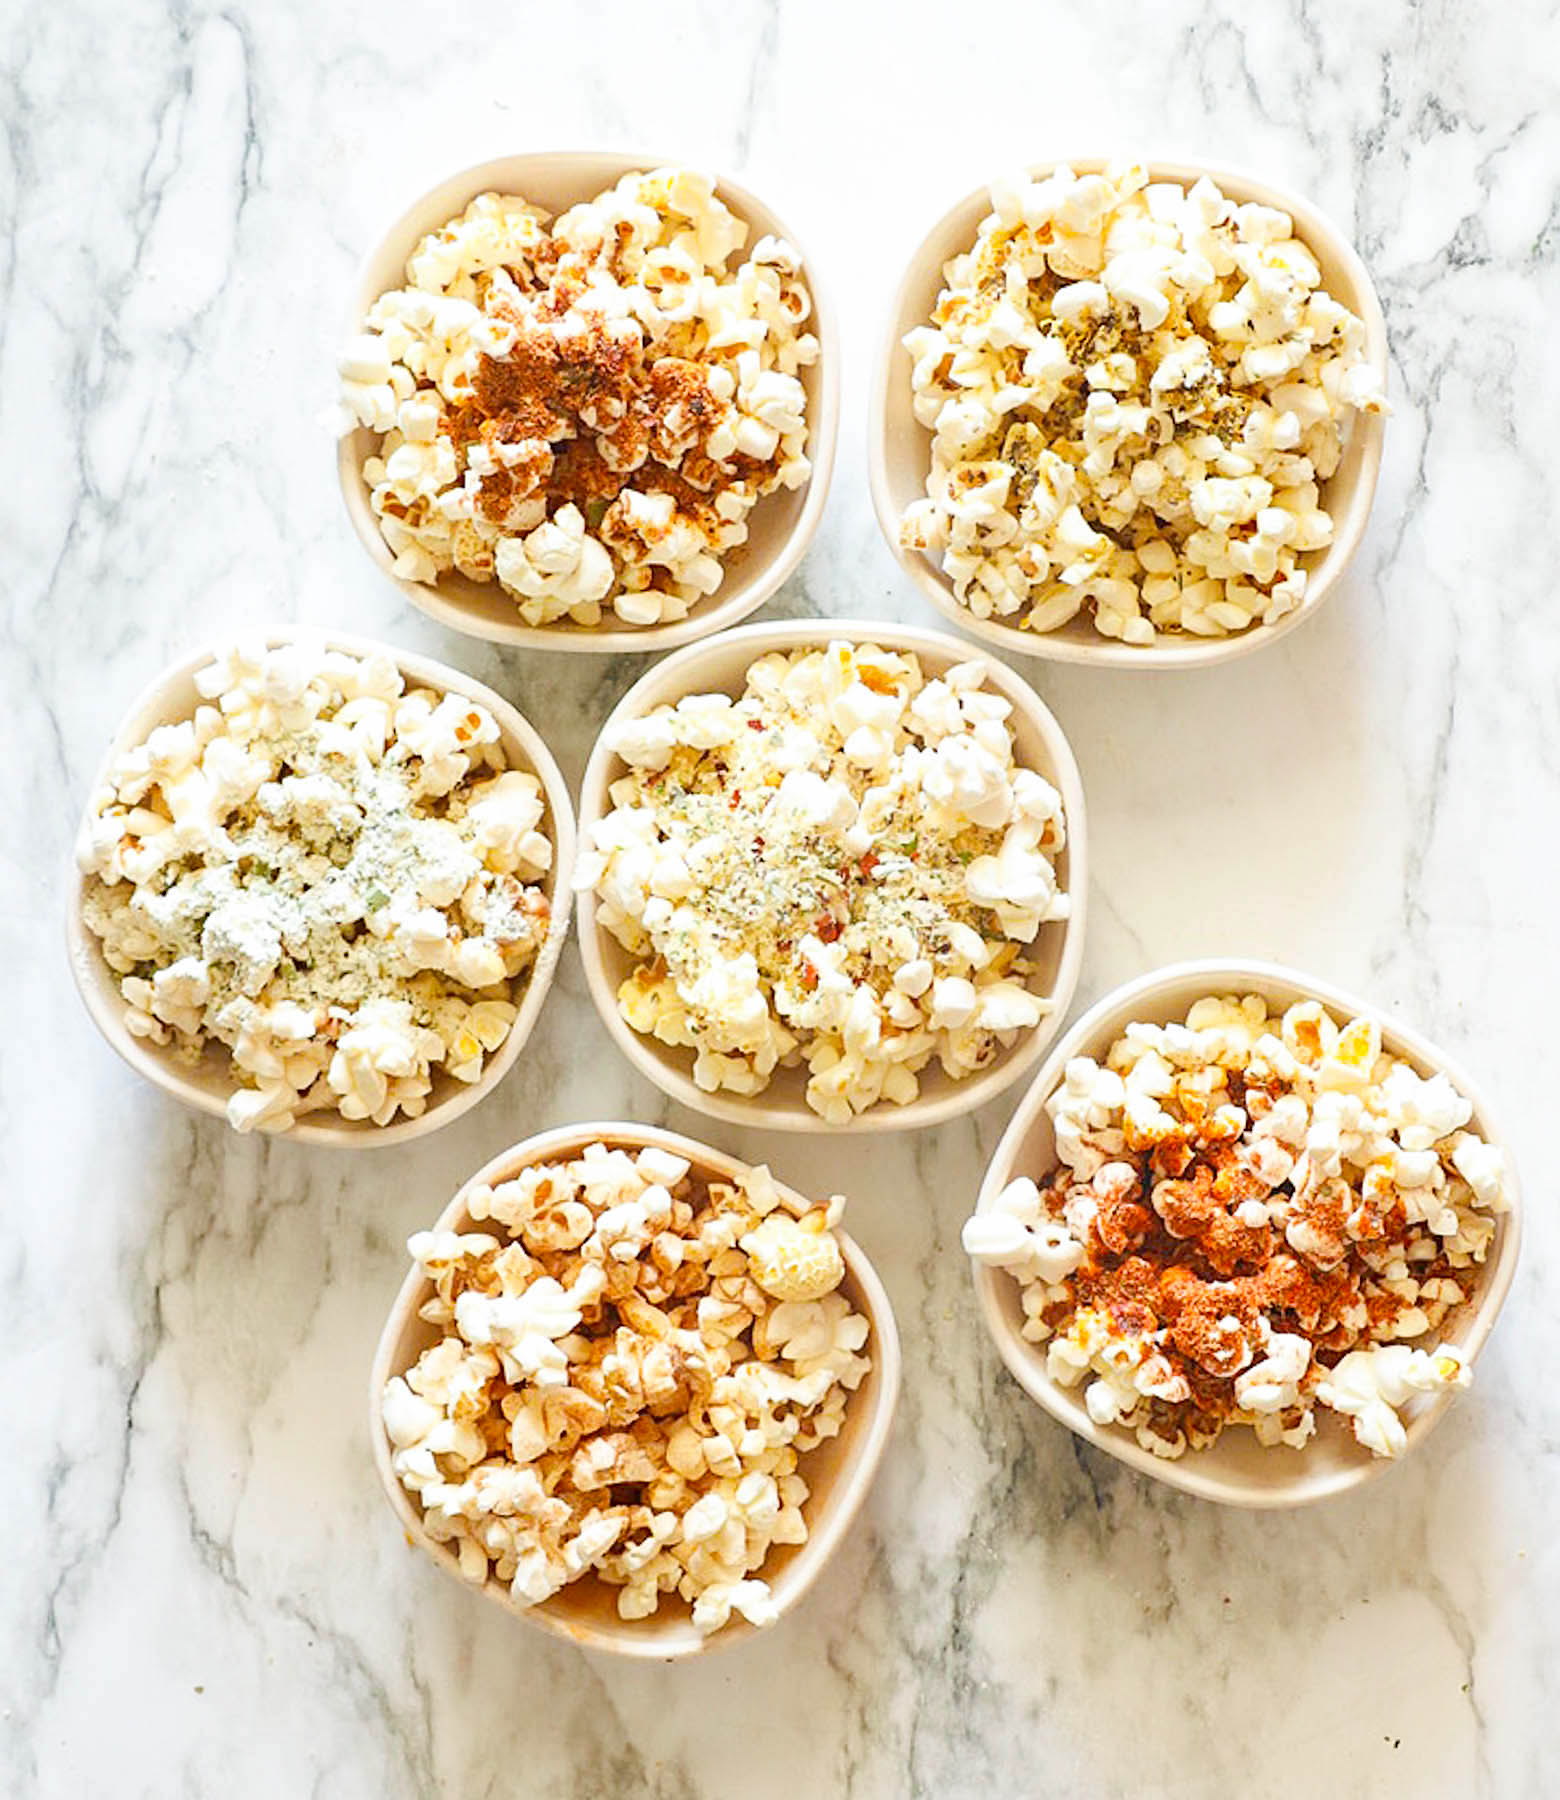 Sweet and delicious 6 types of popcorn seasoning